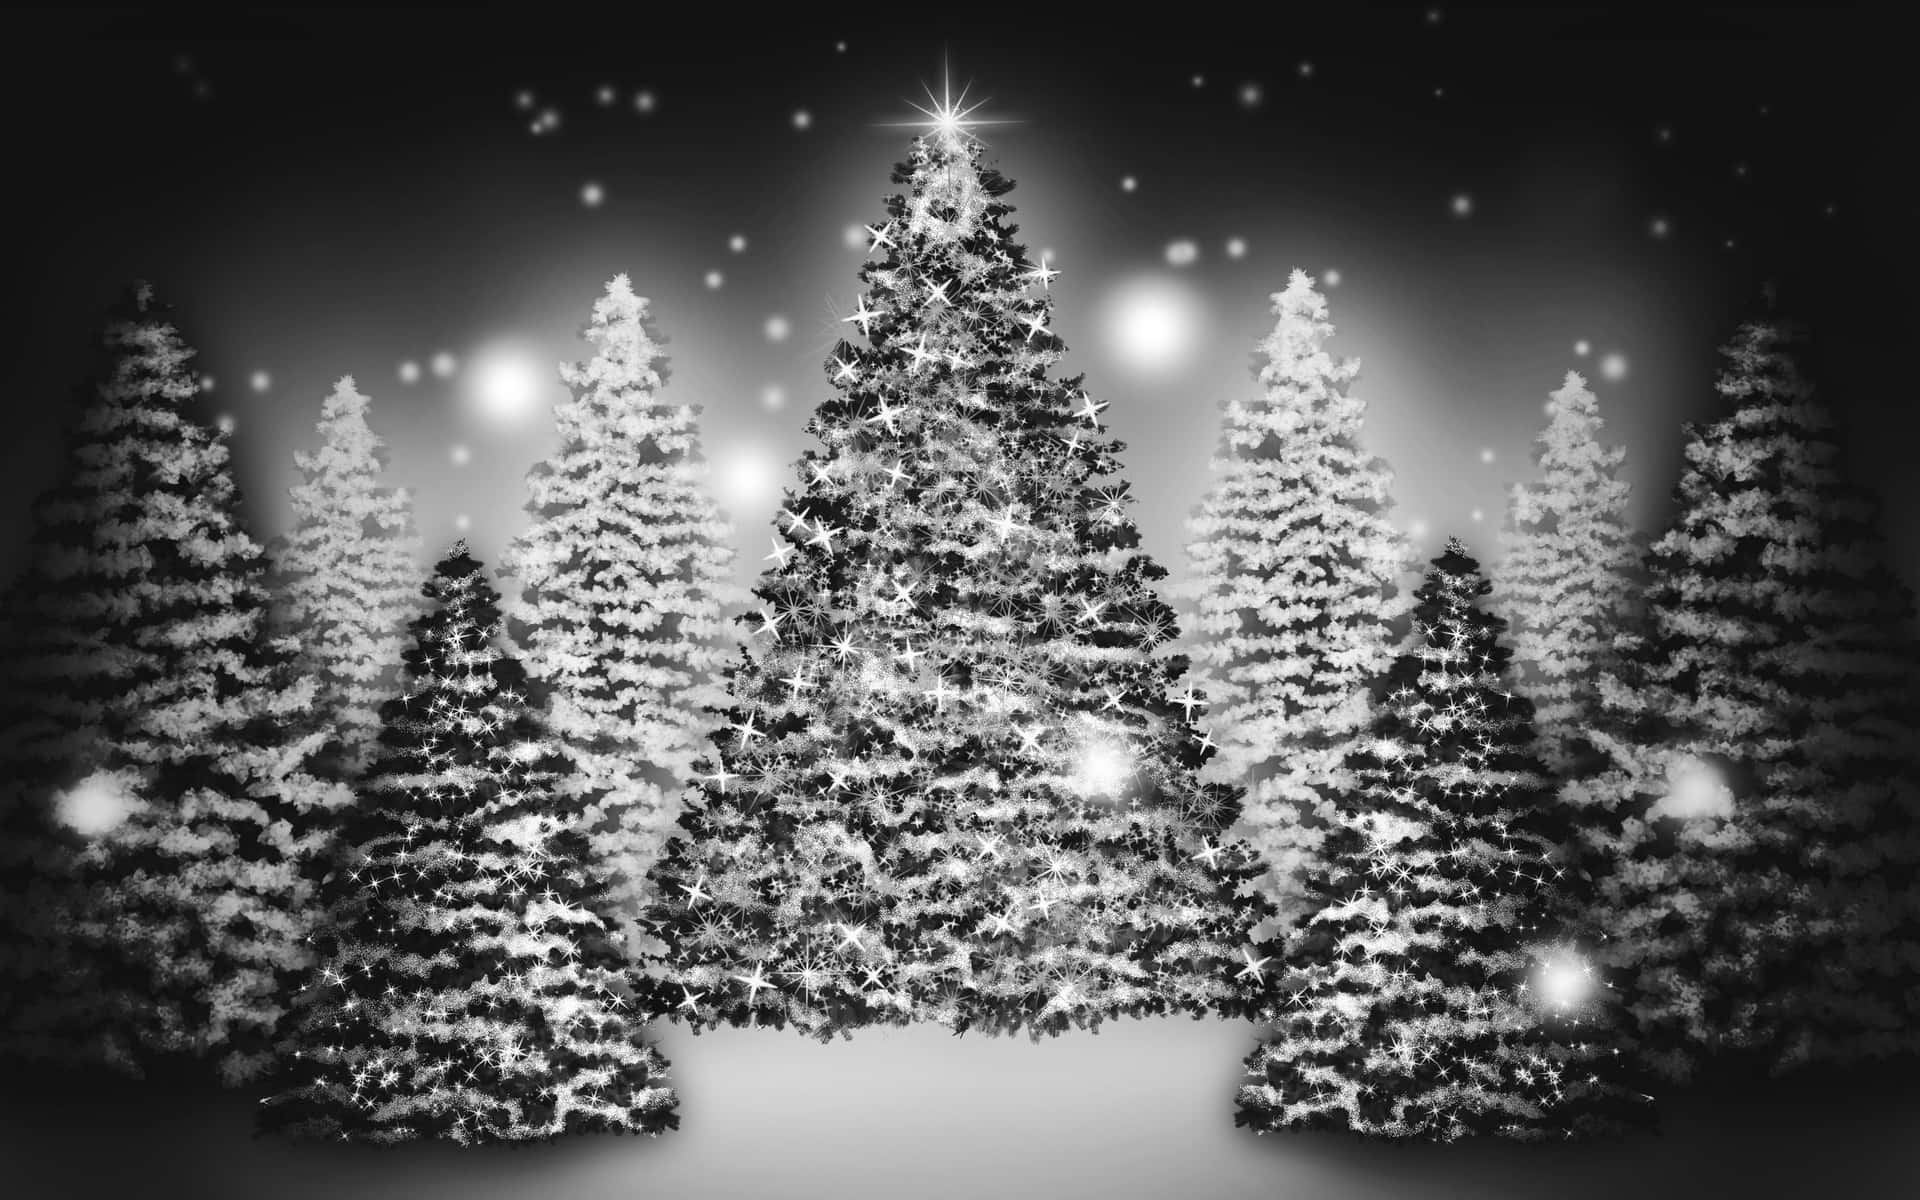 Bring on the holiday season with this stunning black Christmas background